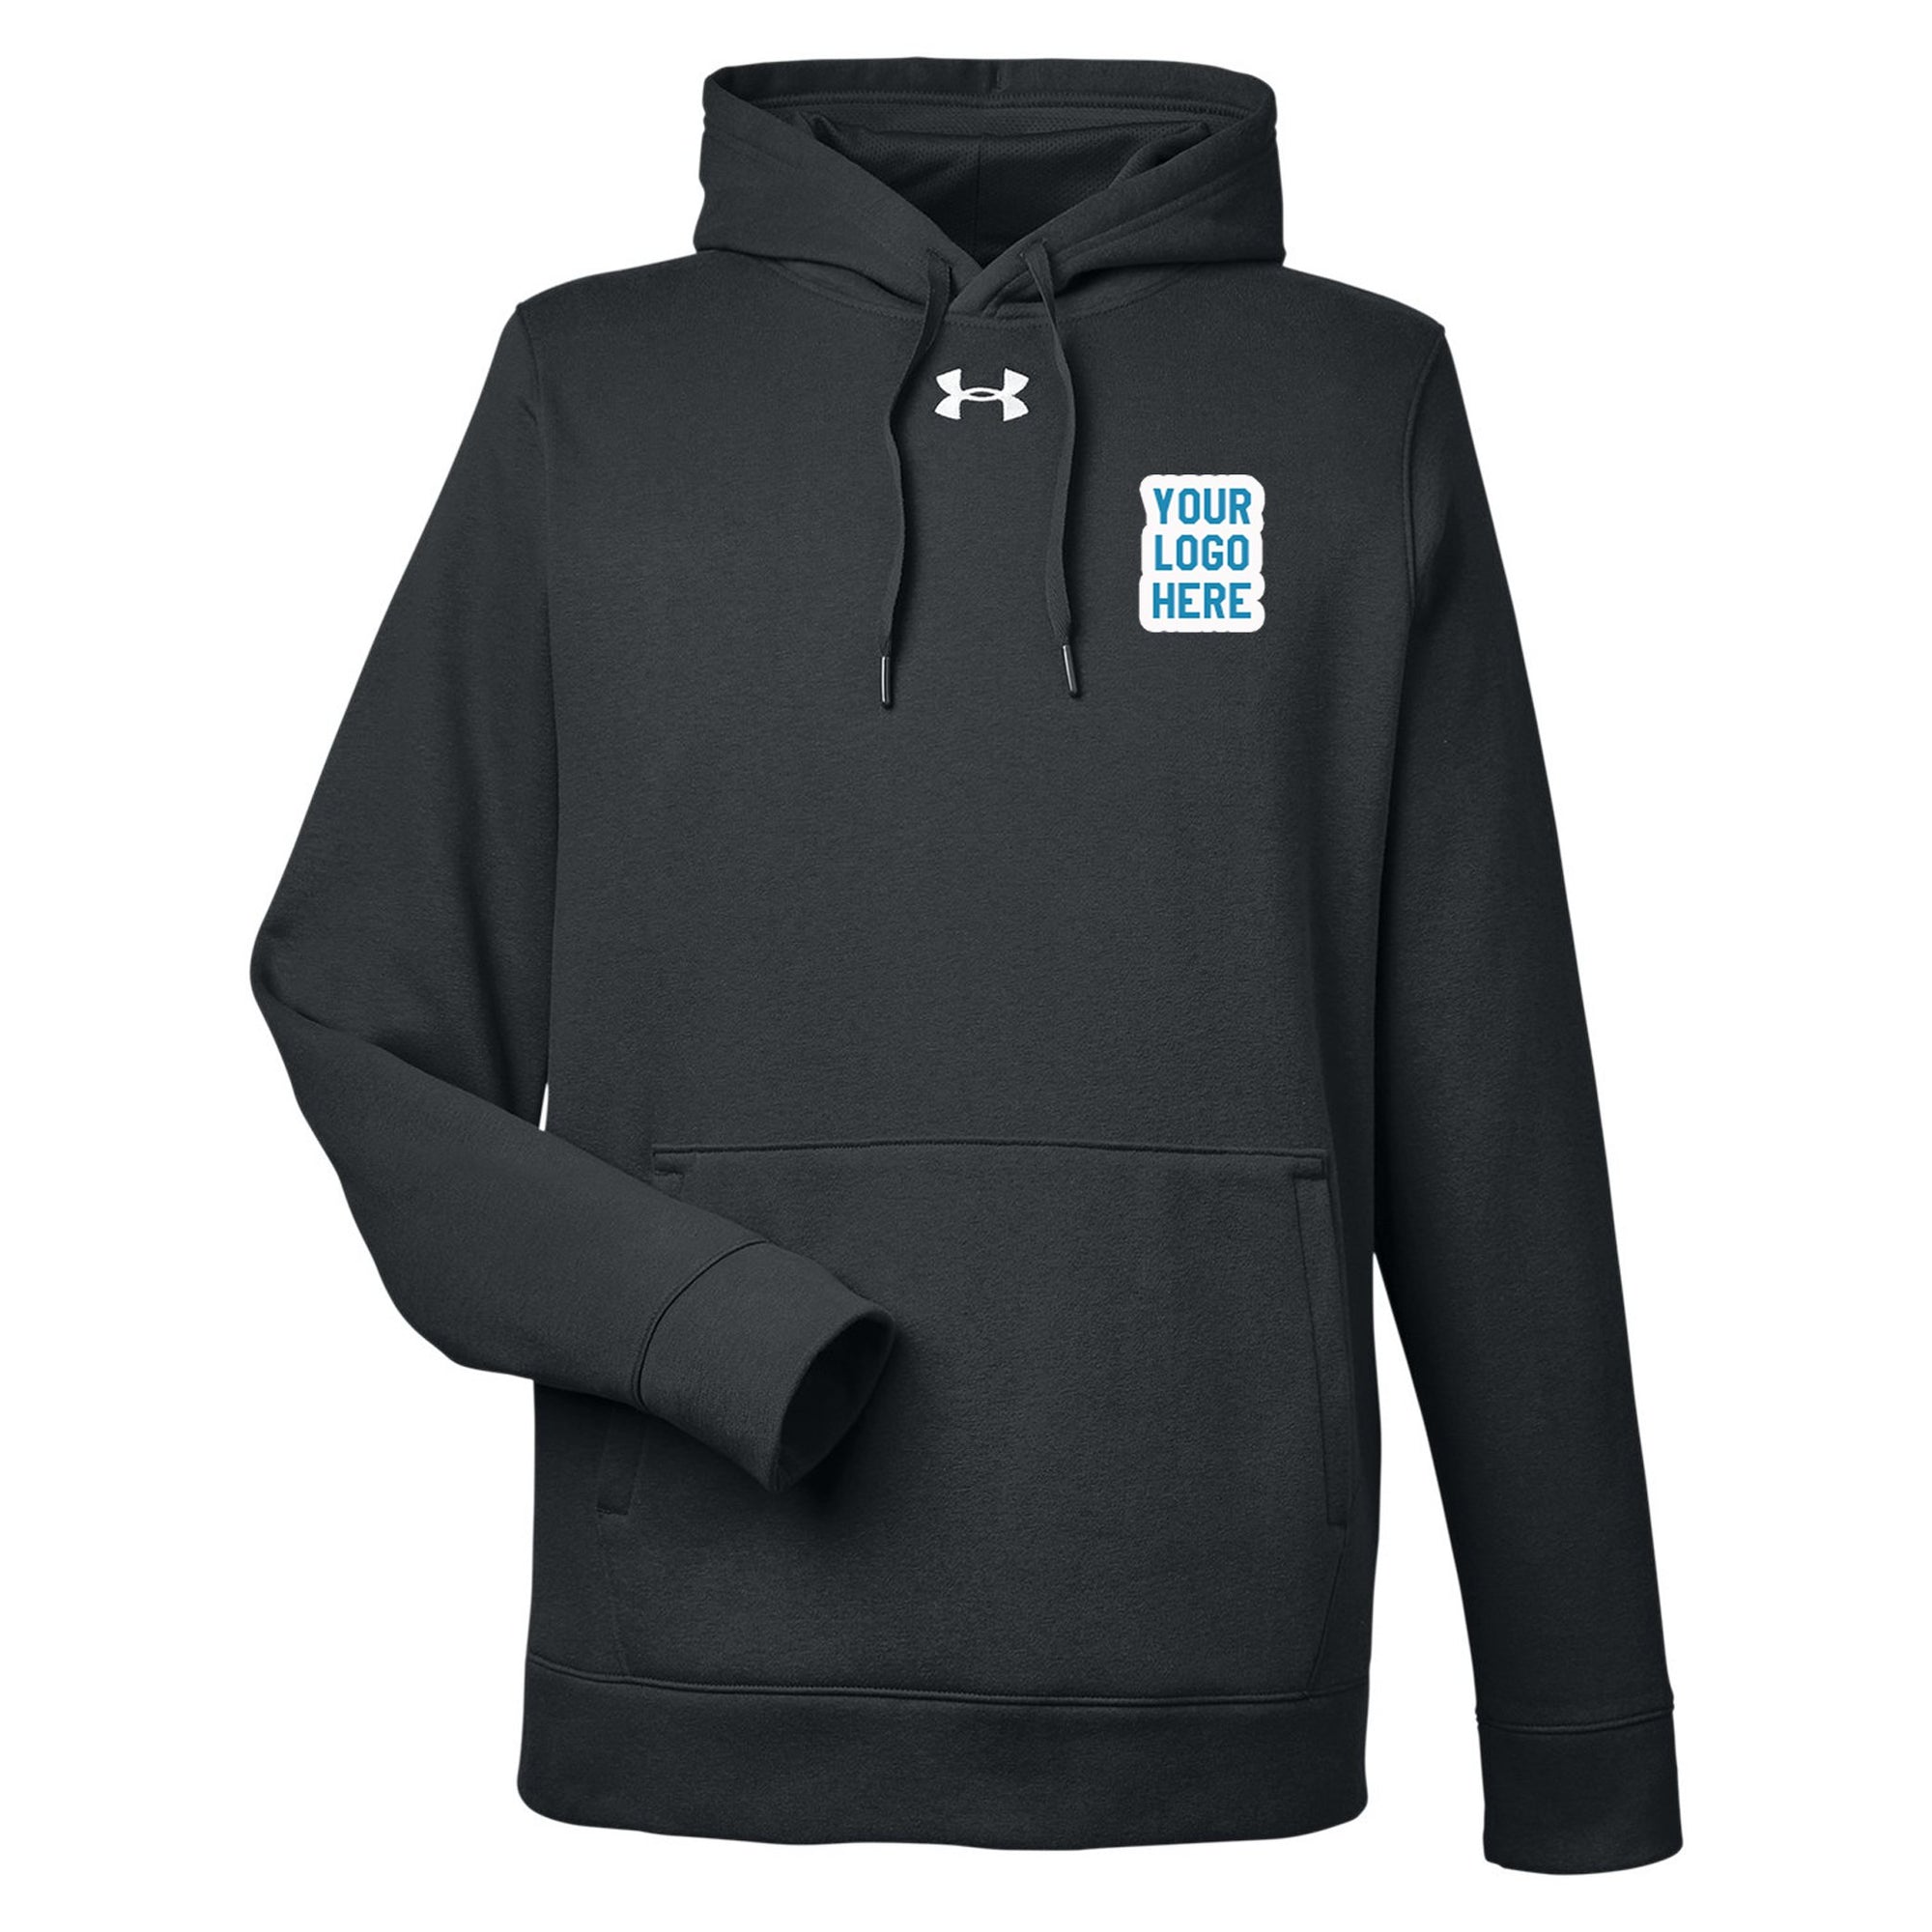 Rugby Imports Under Armour Hustle Hooded Sweatshirt